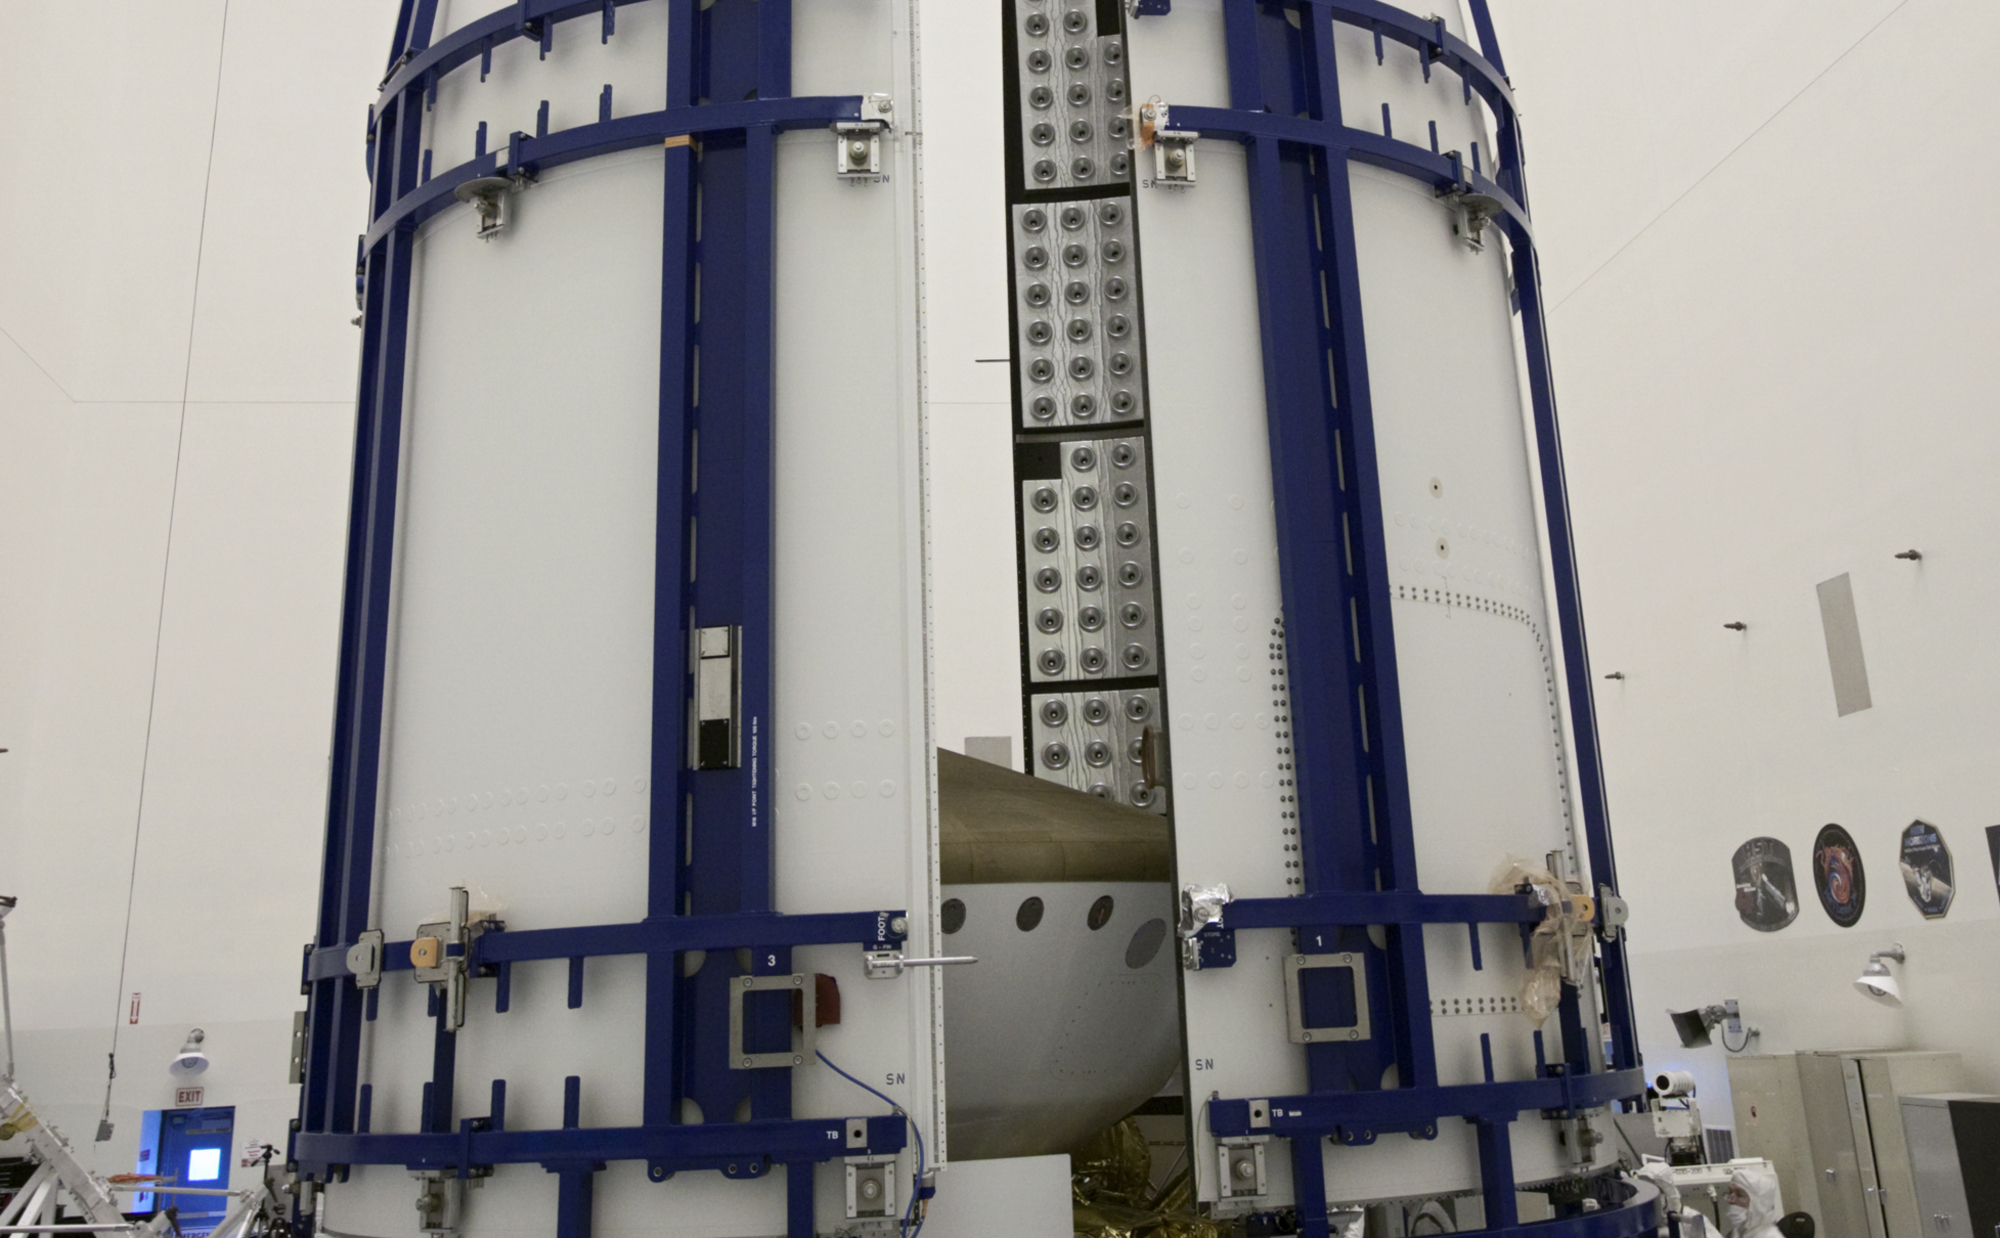 In the Payload Hazardous Servicing Facility at NASA's Kennedy Space Center in Florida, sections of an Atlas V rocket payload fairing obscure NASA's Mars Science Laboratory (MSL) from view as they close in around it.